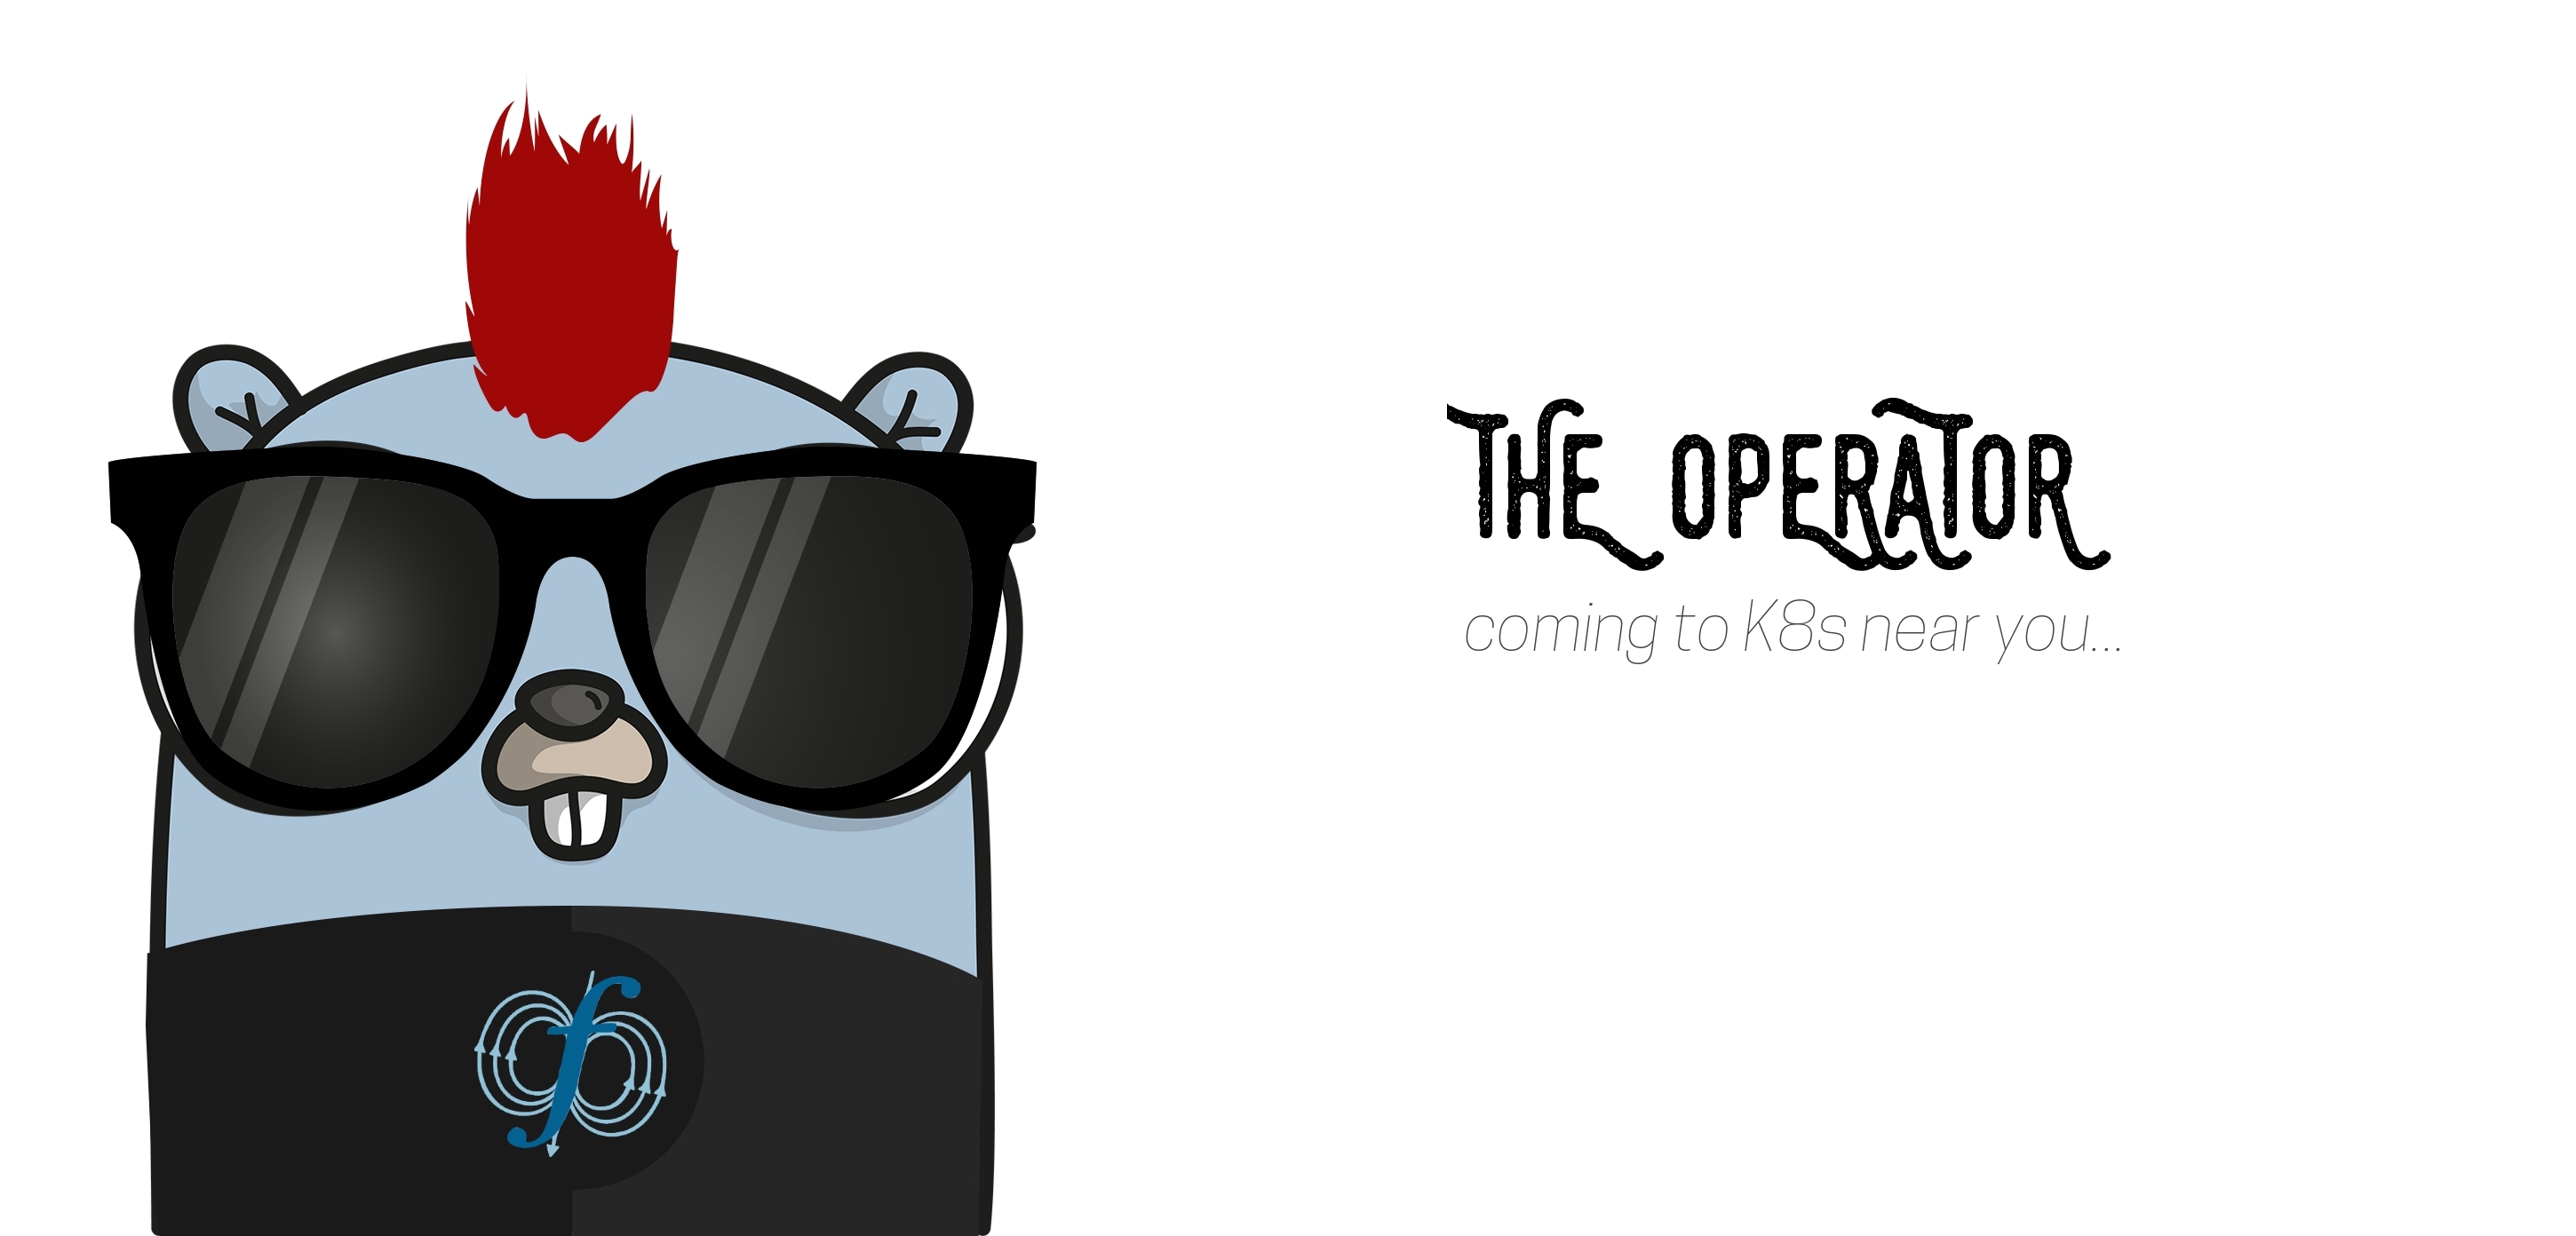 ../images/the-operator.jpg